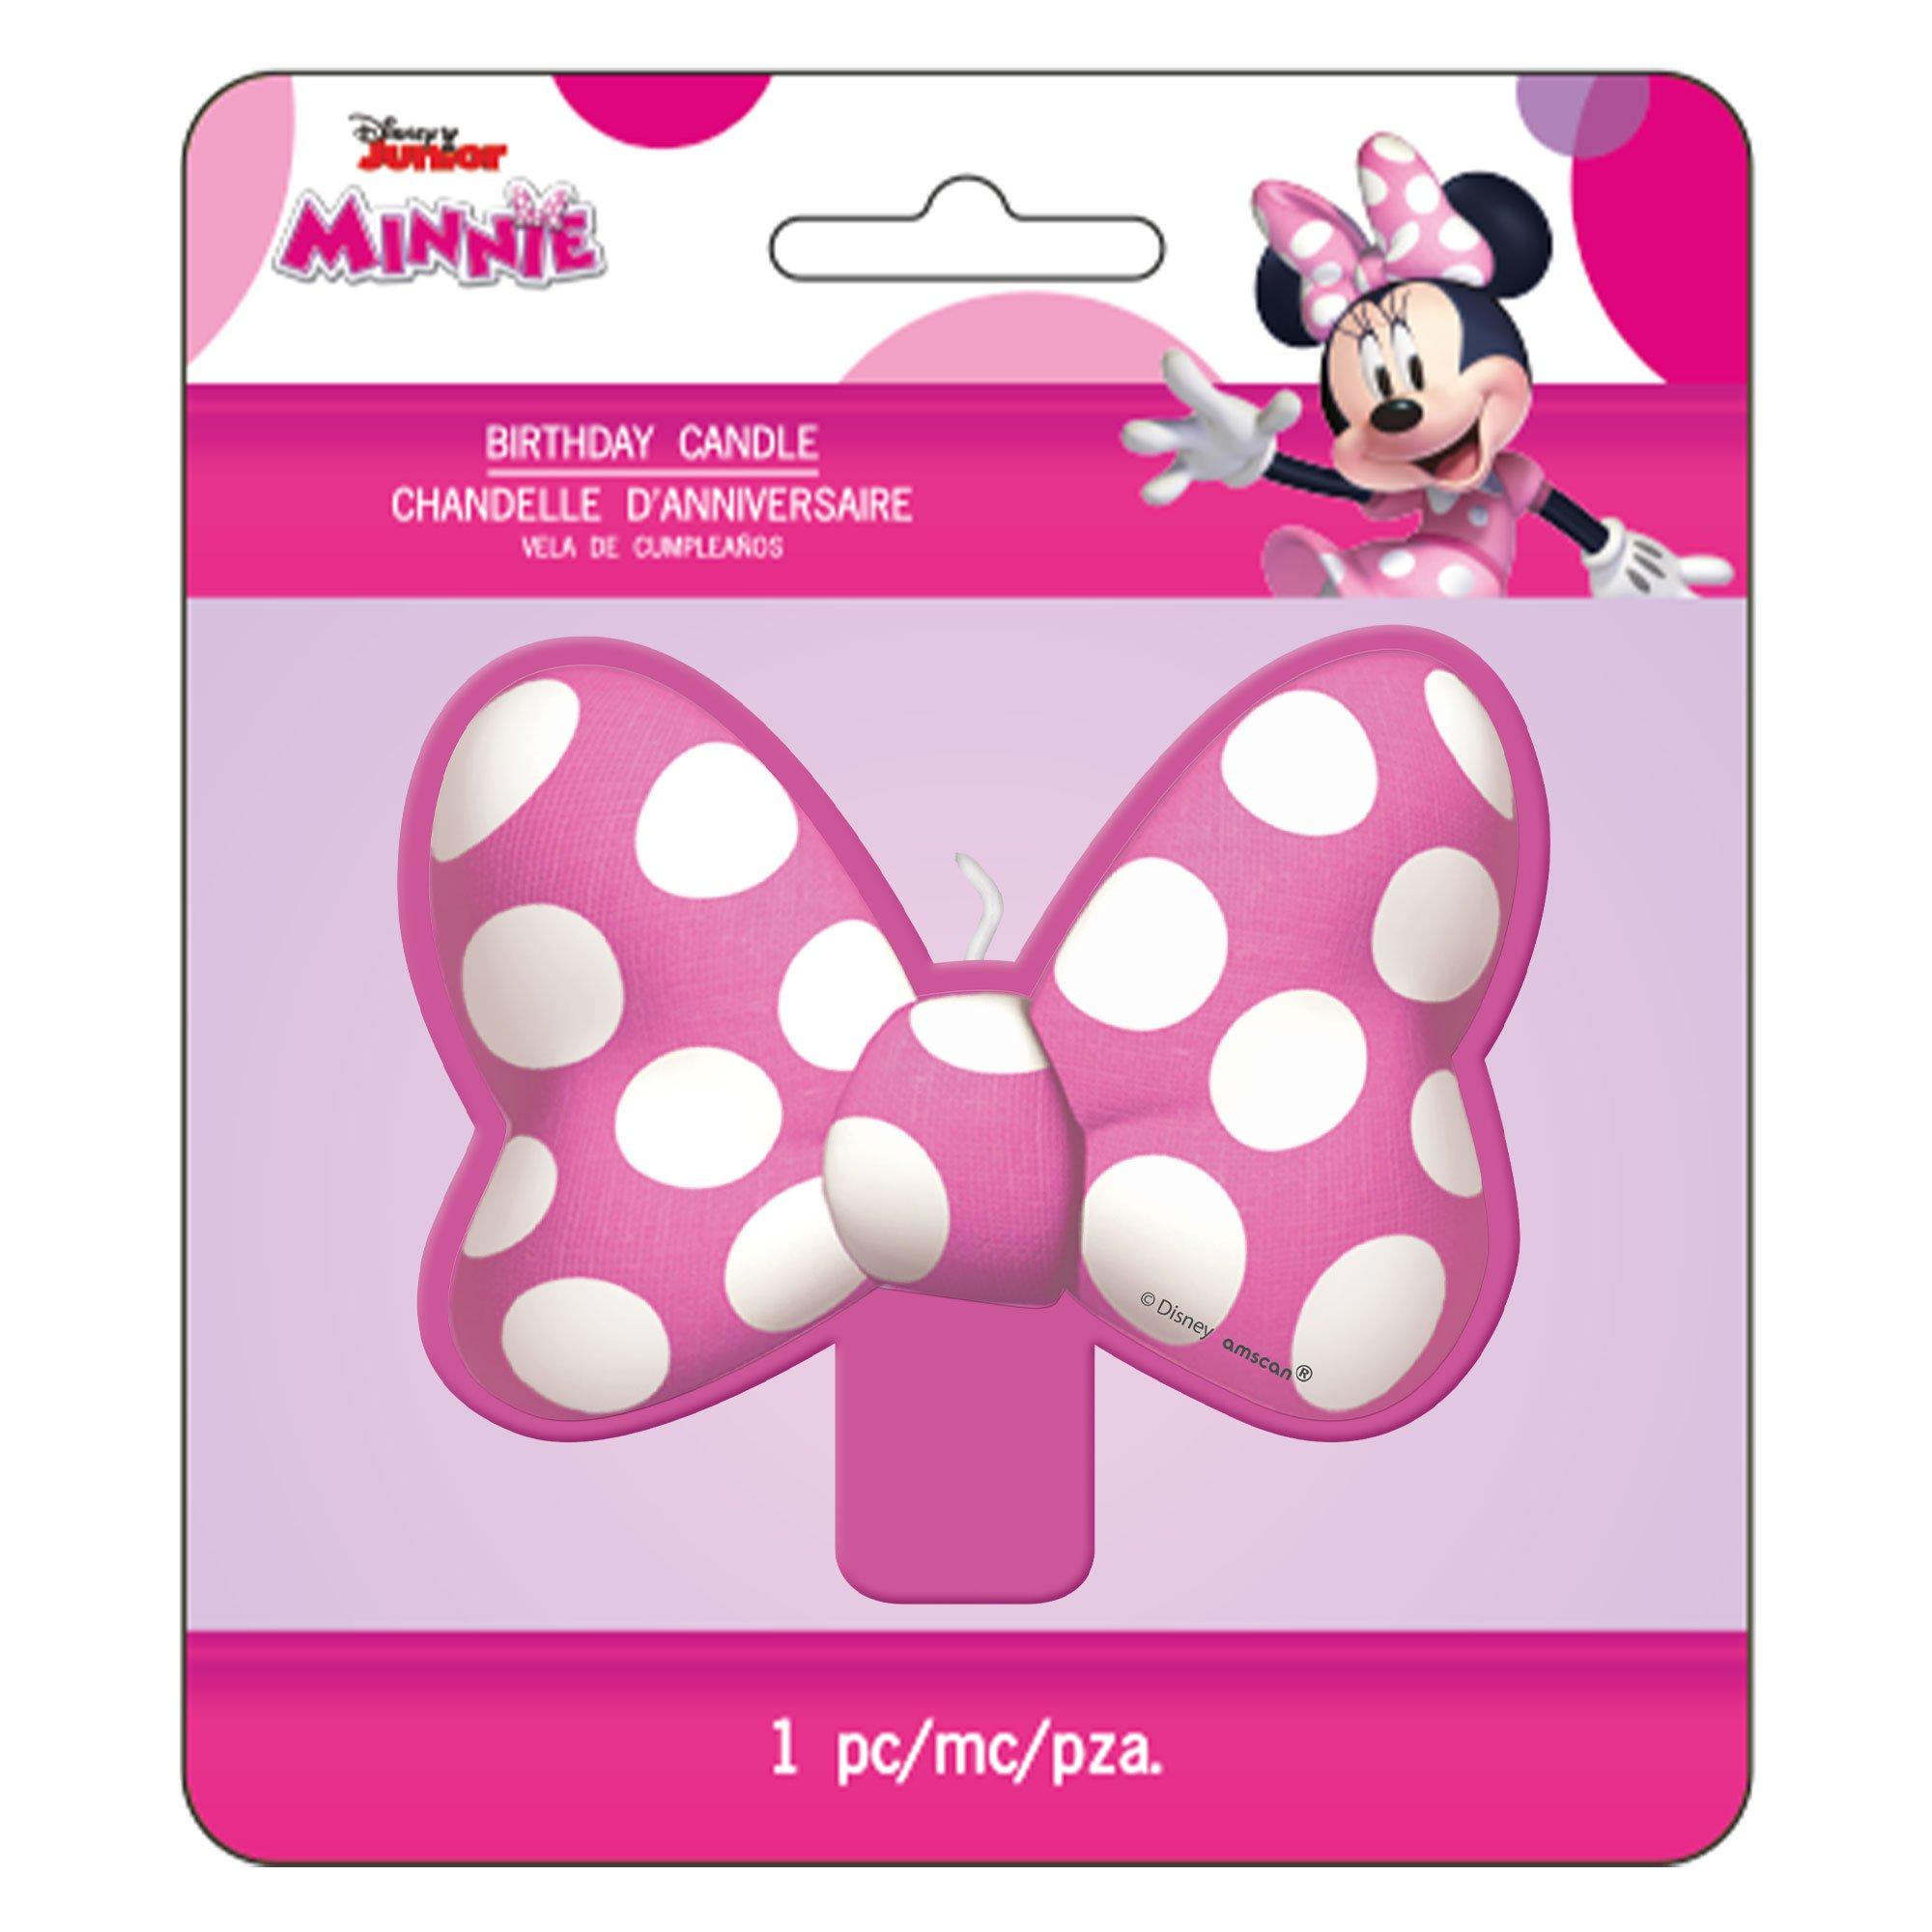 Minnie Mouse Forever Candle